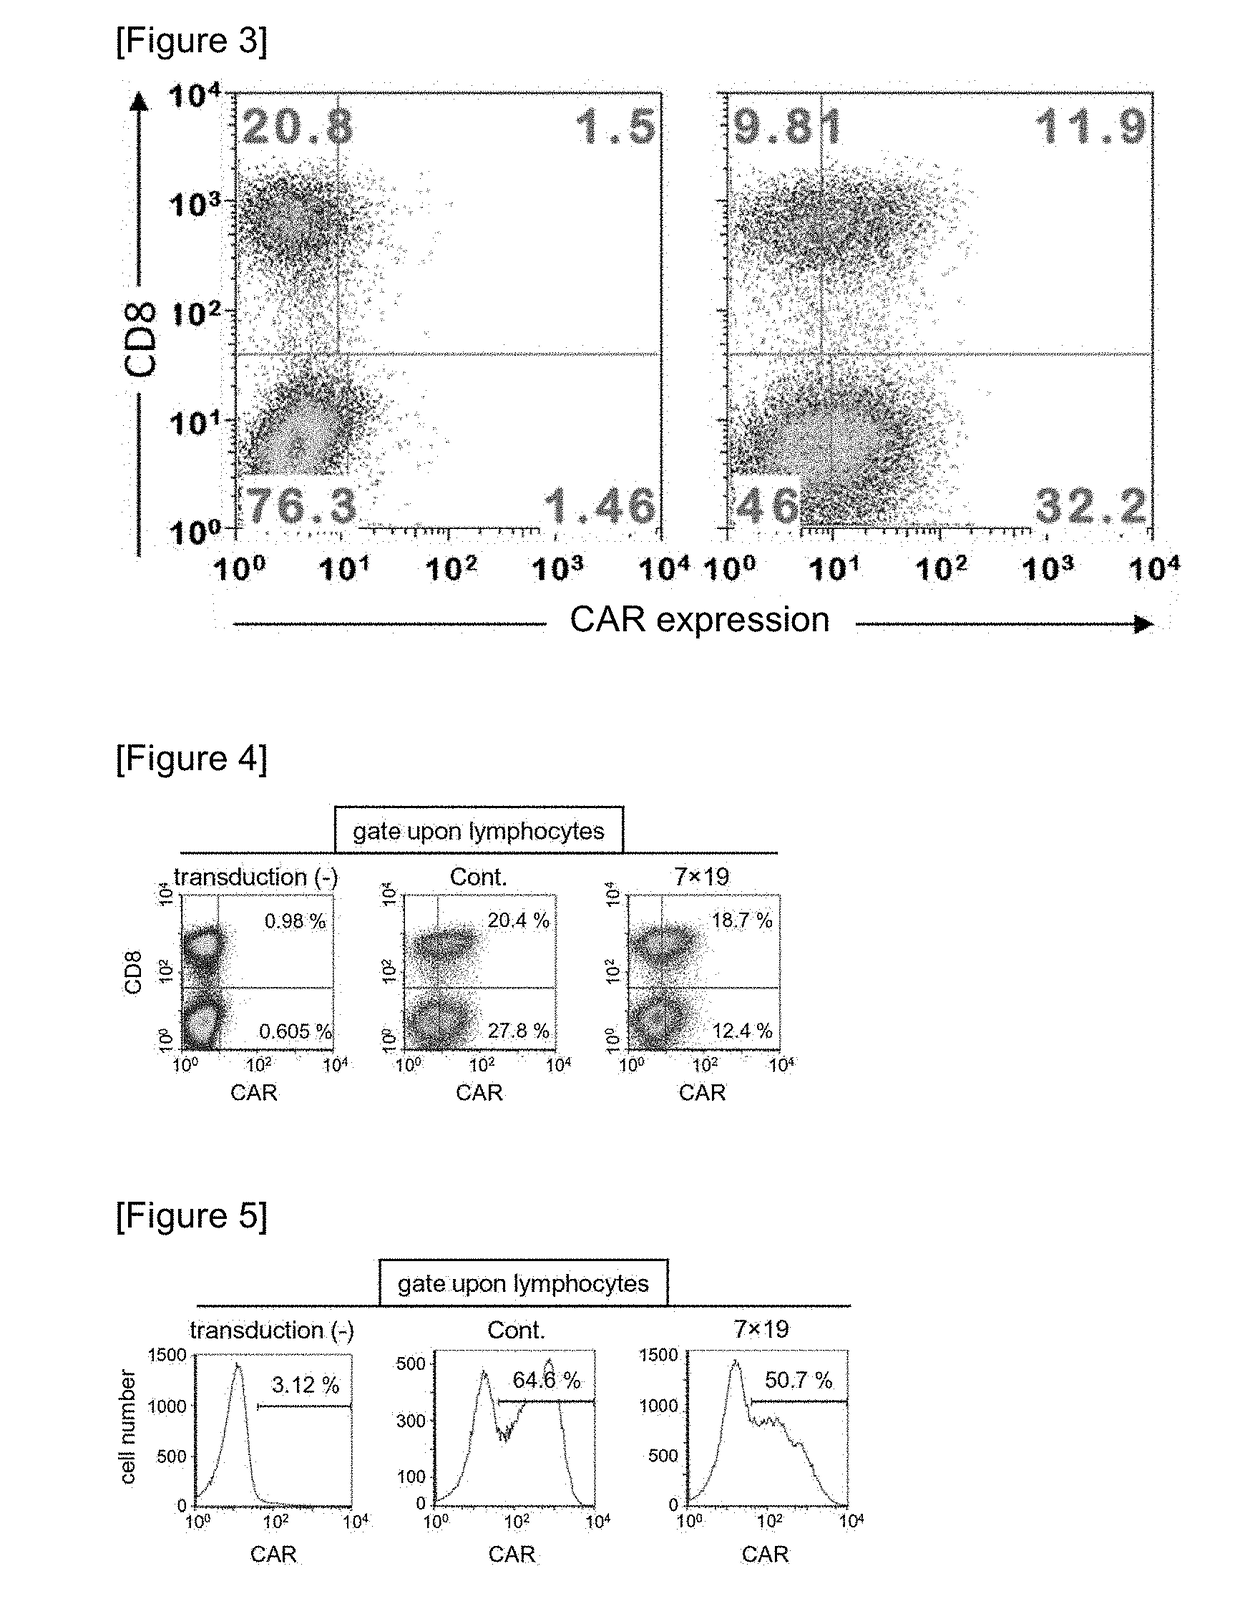 Car expression vector and car-expressing t cells